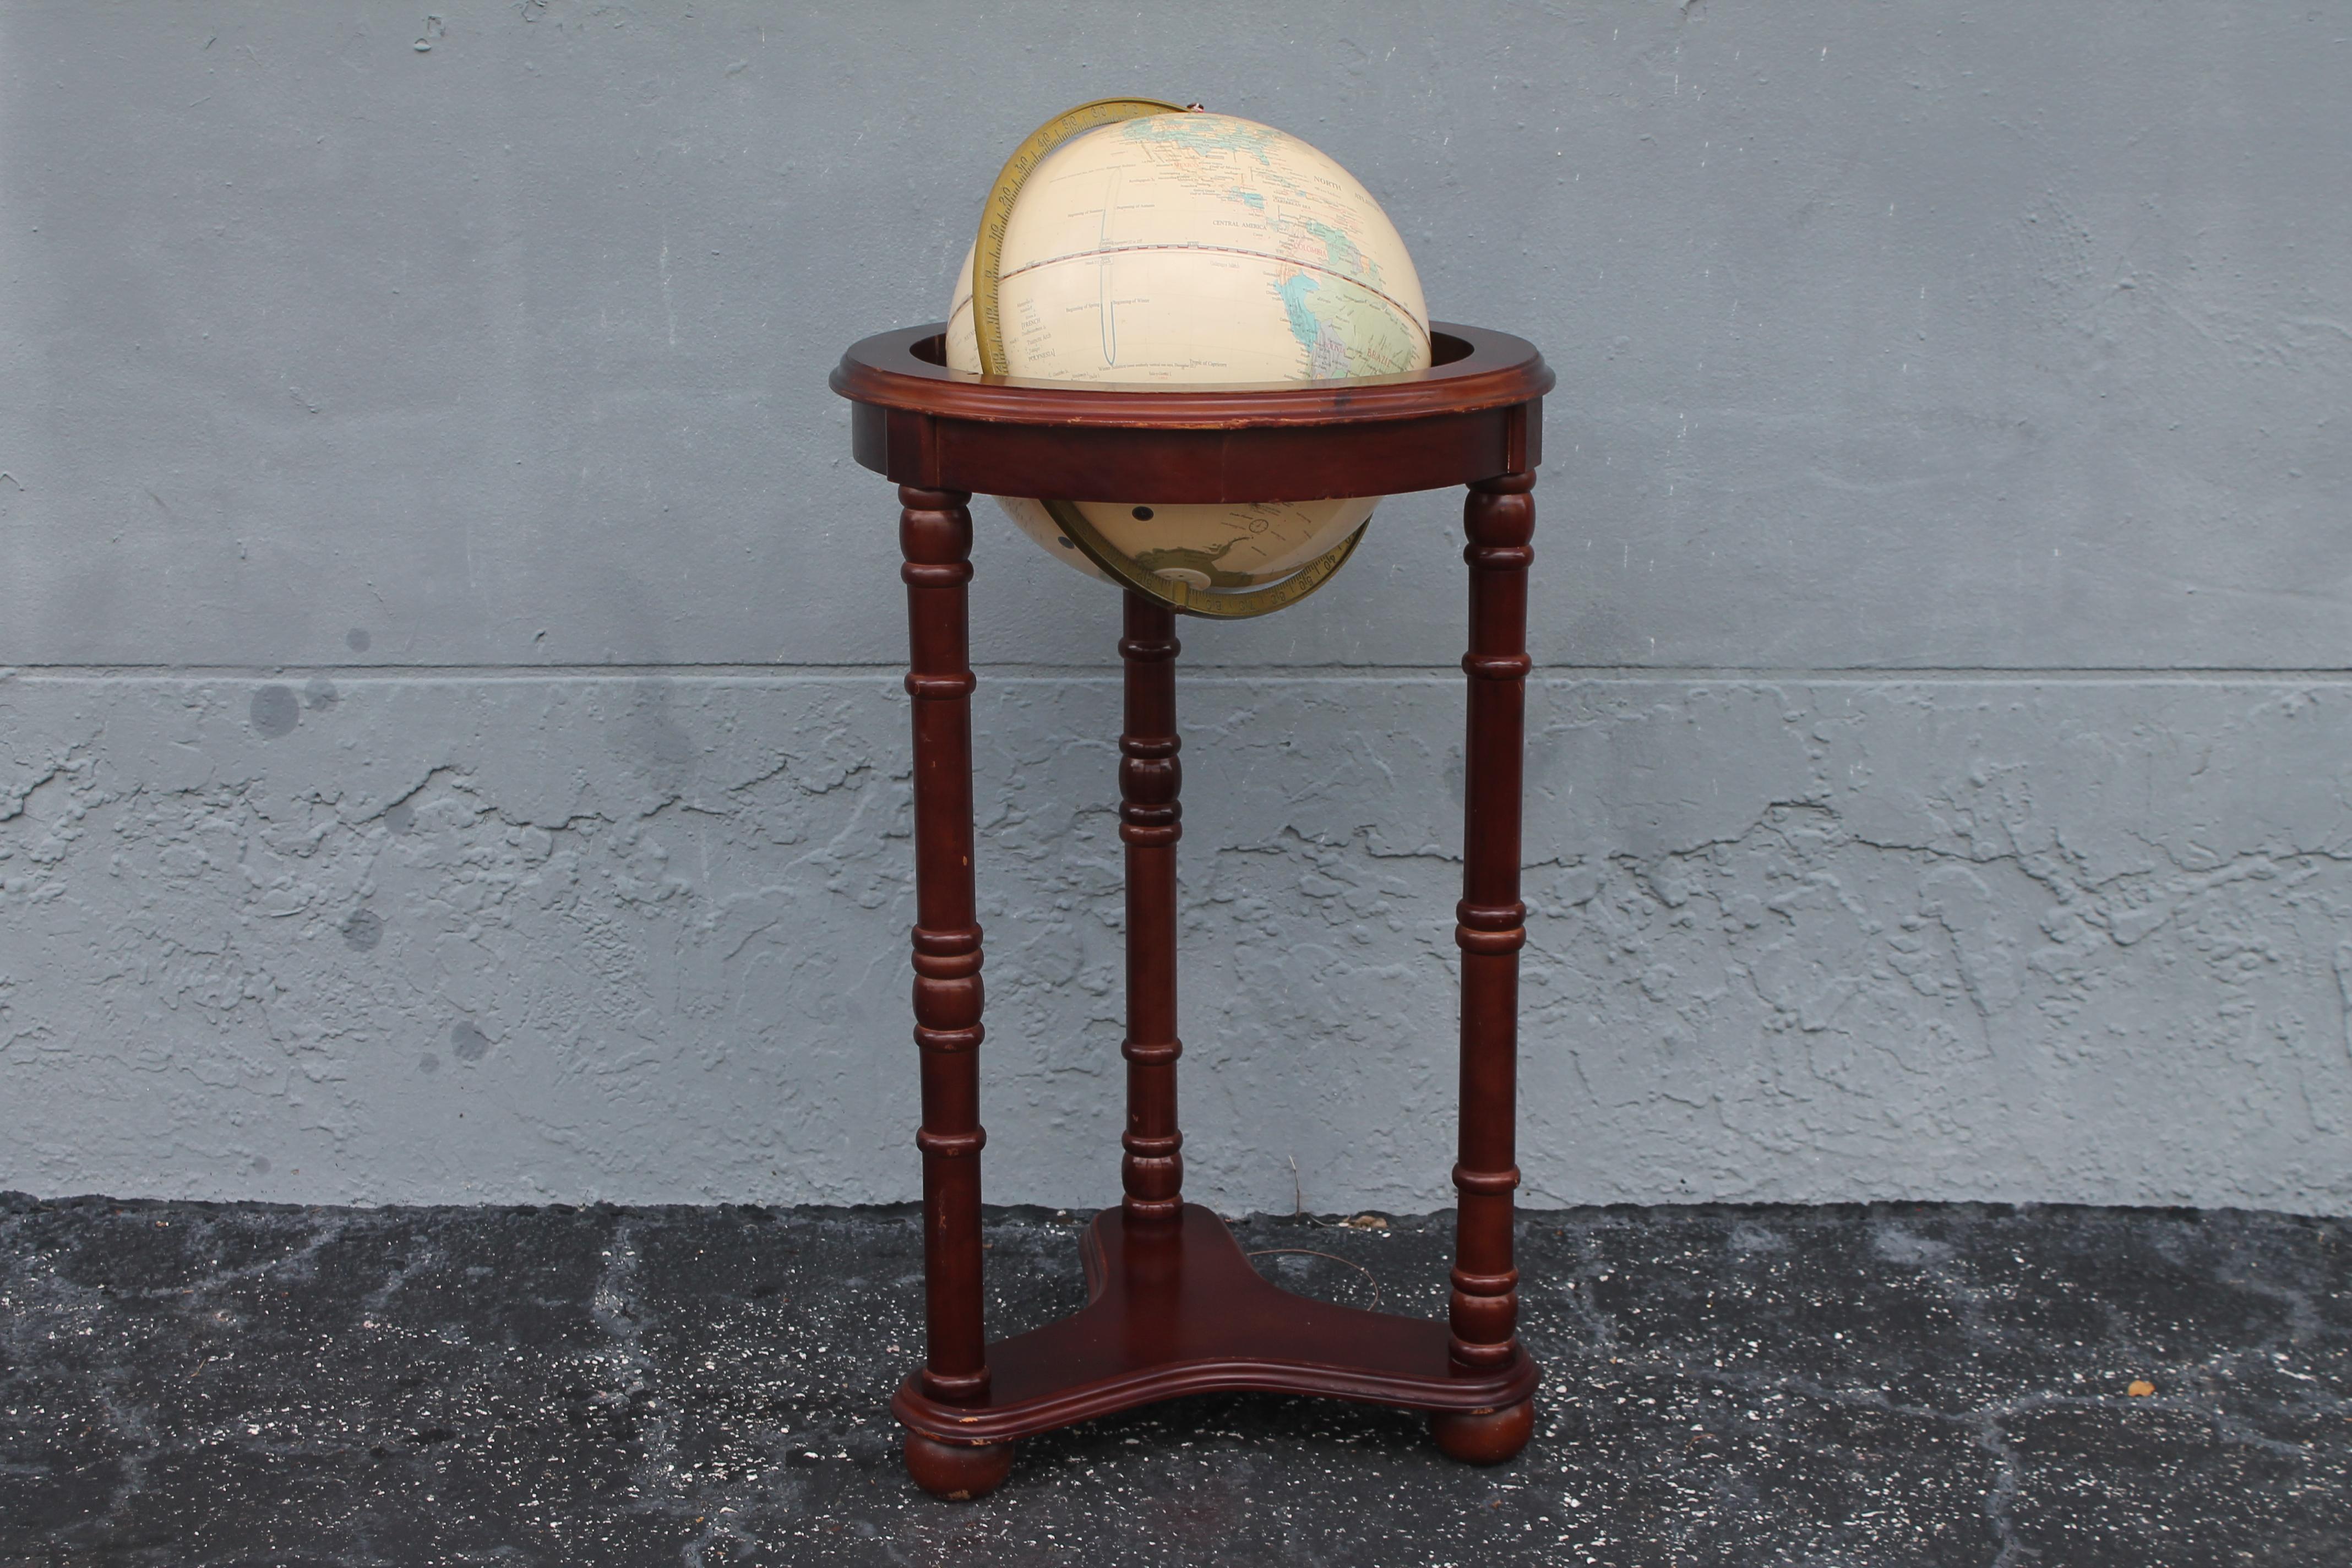 Early 20th Century c1920's French Art Deco World Globe on Pedestal